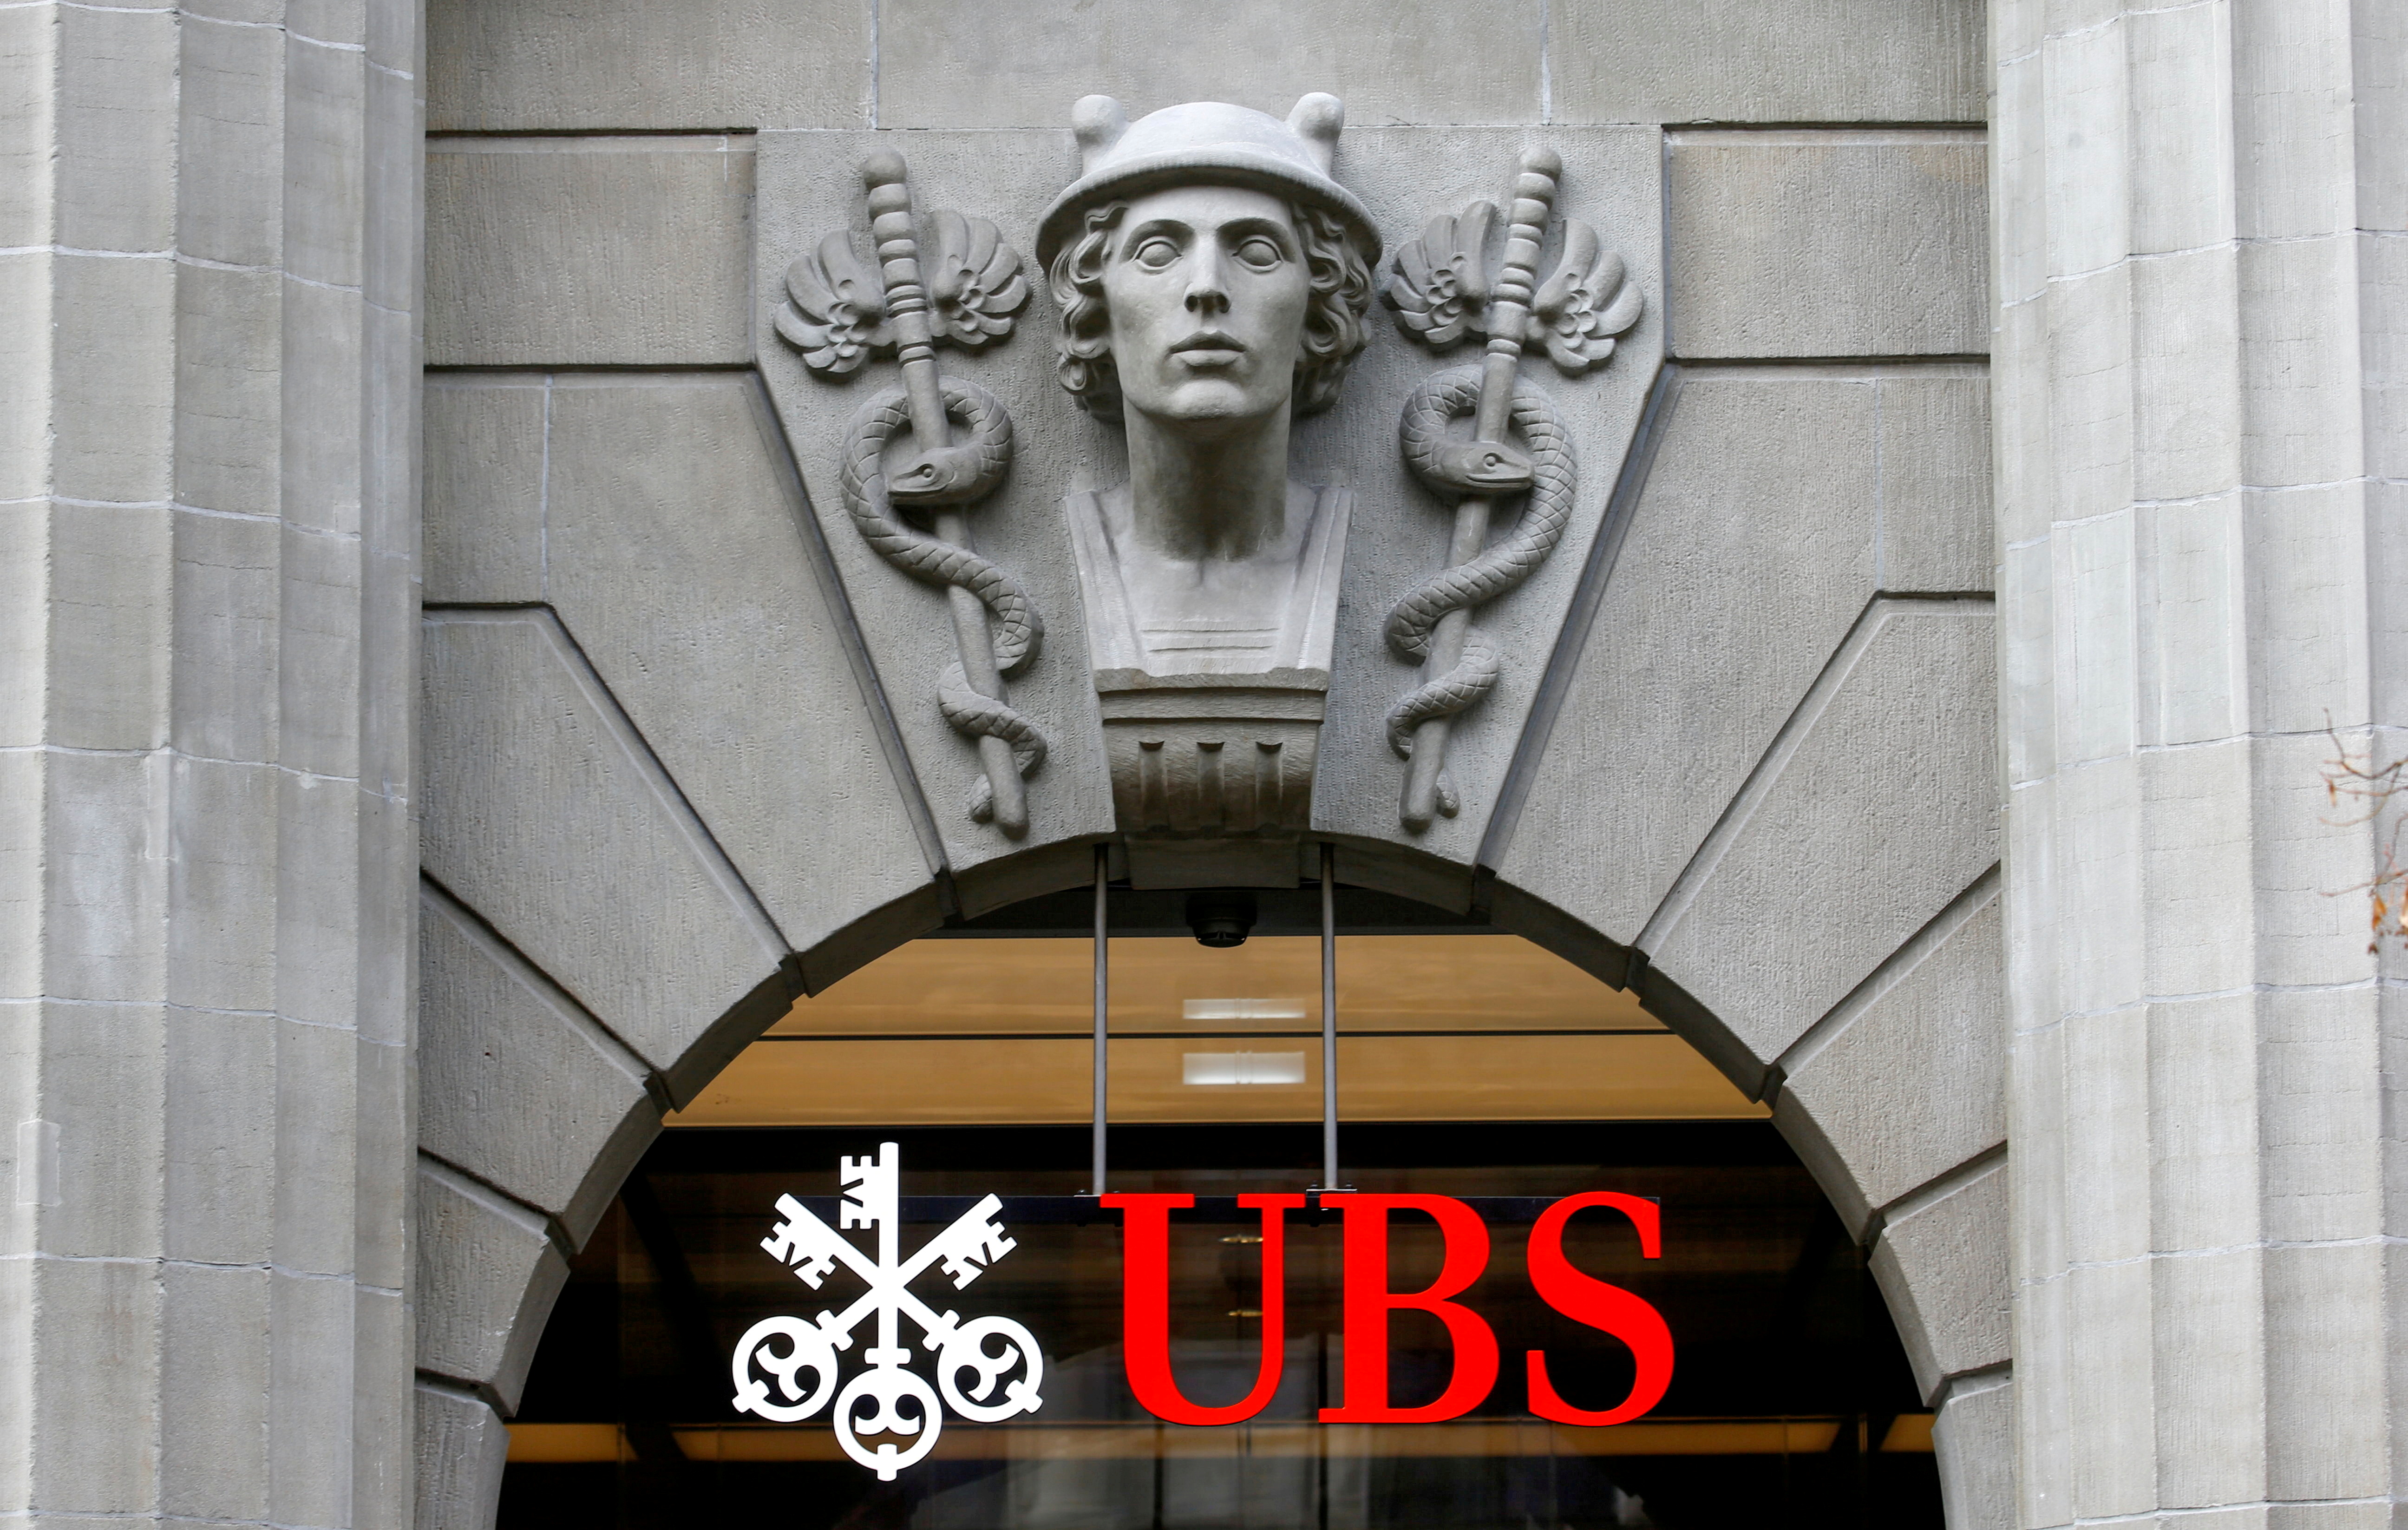 The logo of Swiss bank UBS is seen at its headquarters in Zurich, Switzerland February 17, 2021. REUTERS/Arnd Wiegmann/File Photo